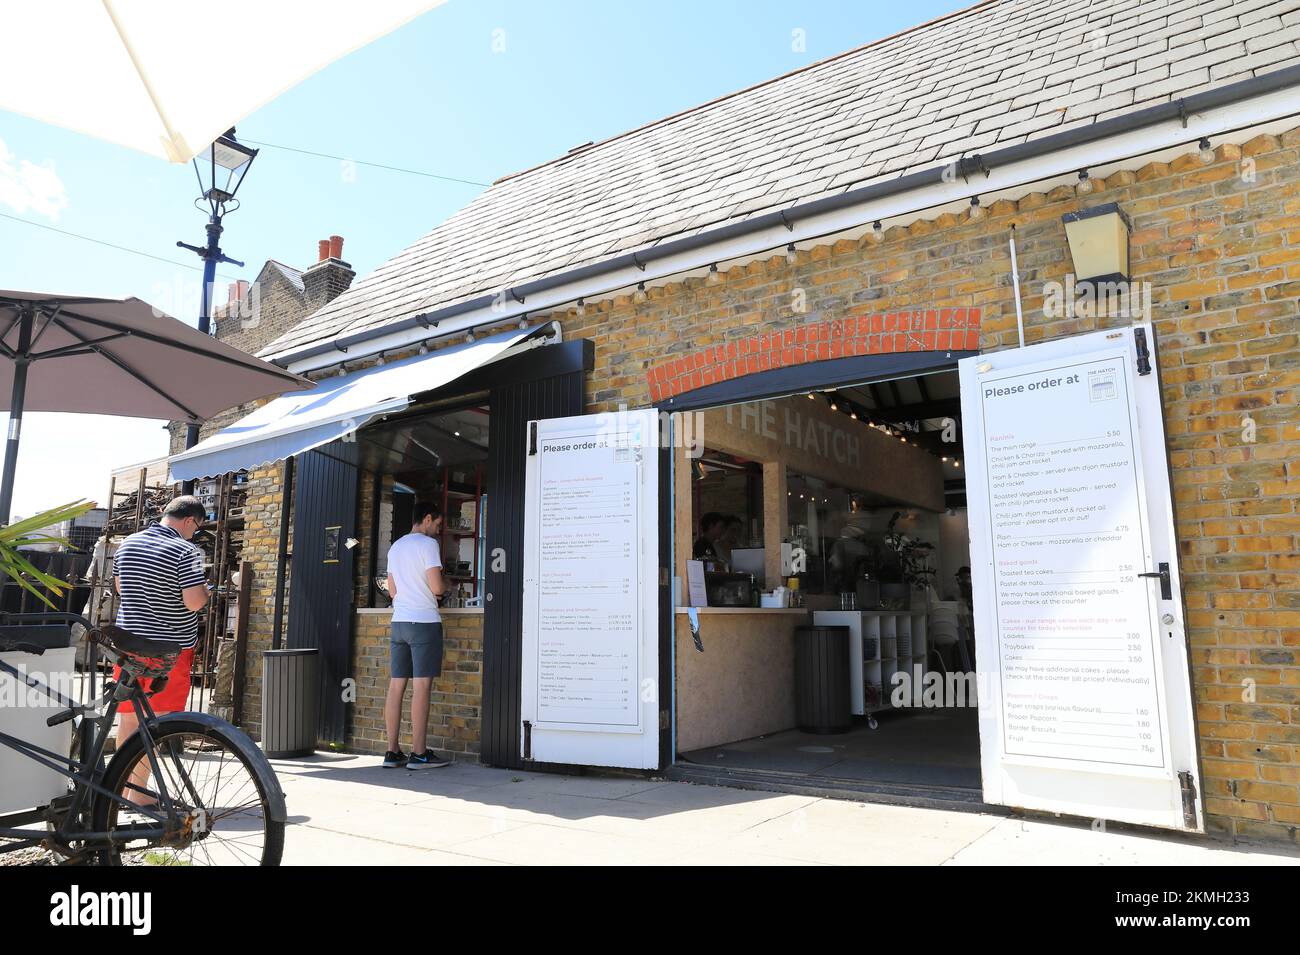 The Hatch coffee shop, on the High Street in Leigh-on-sea, Southend-on-sea, Essex, UK Stock Photo